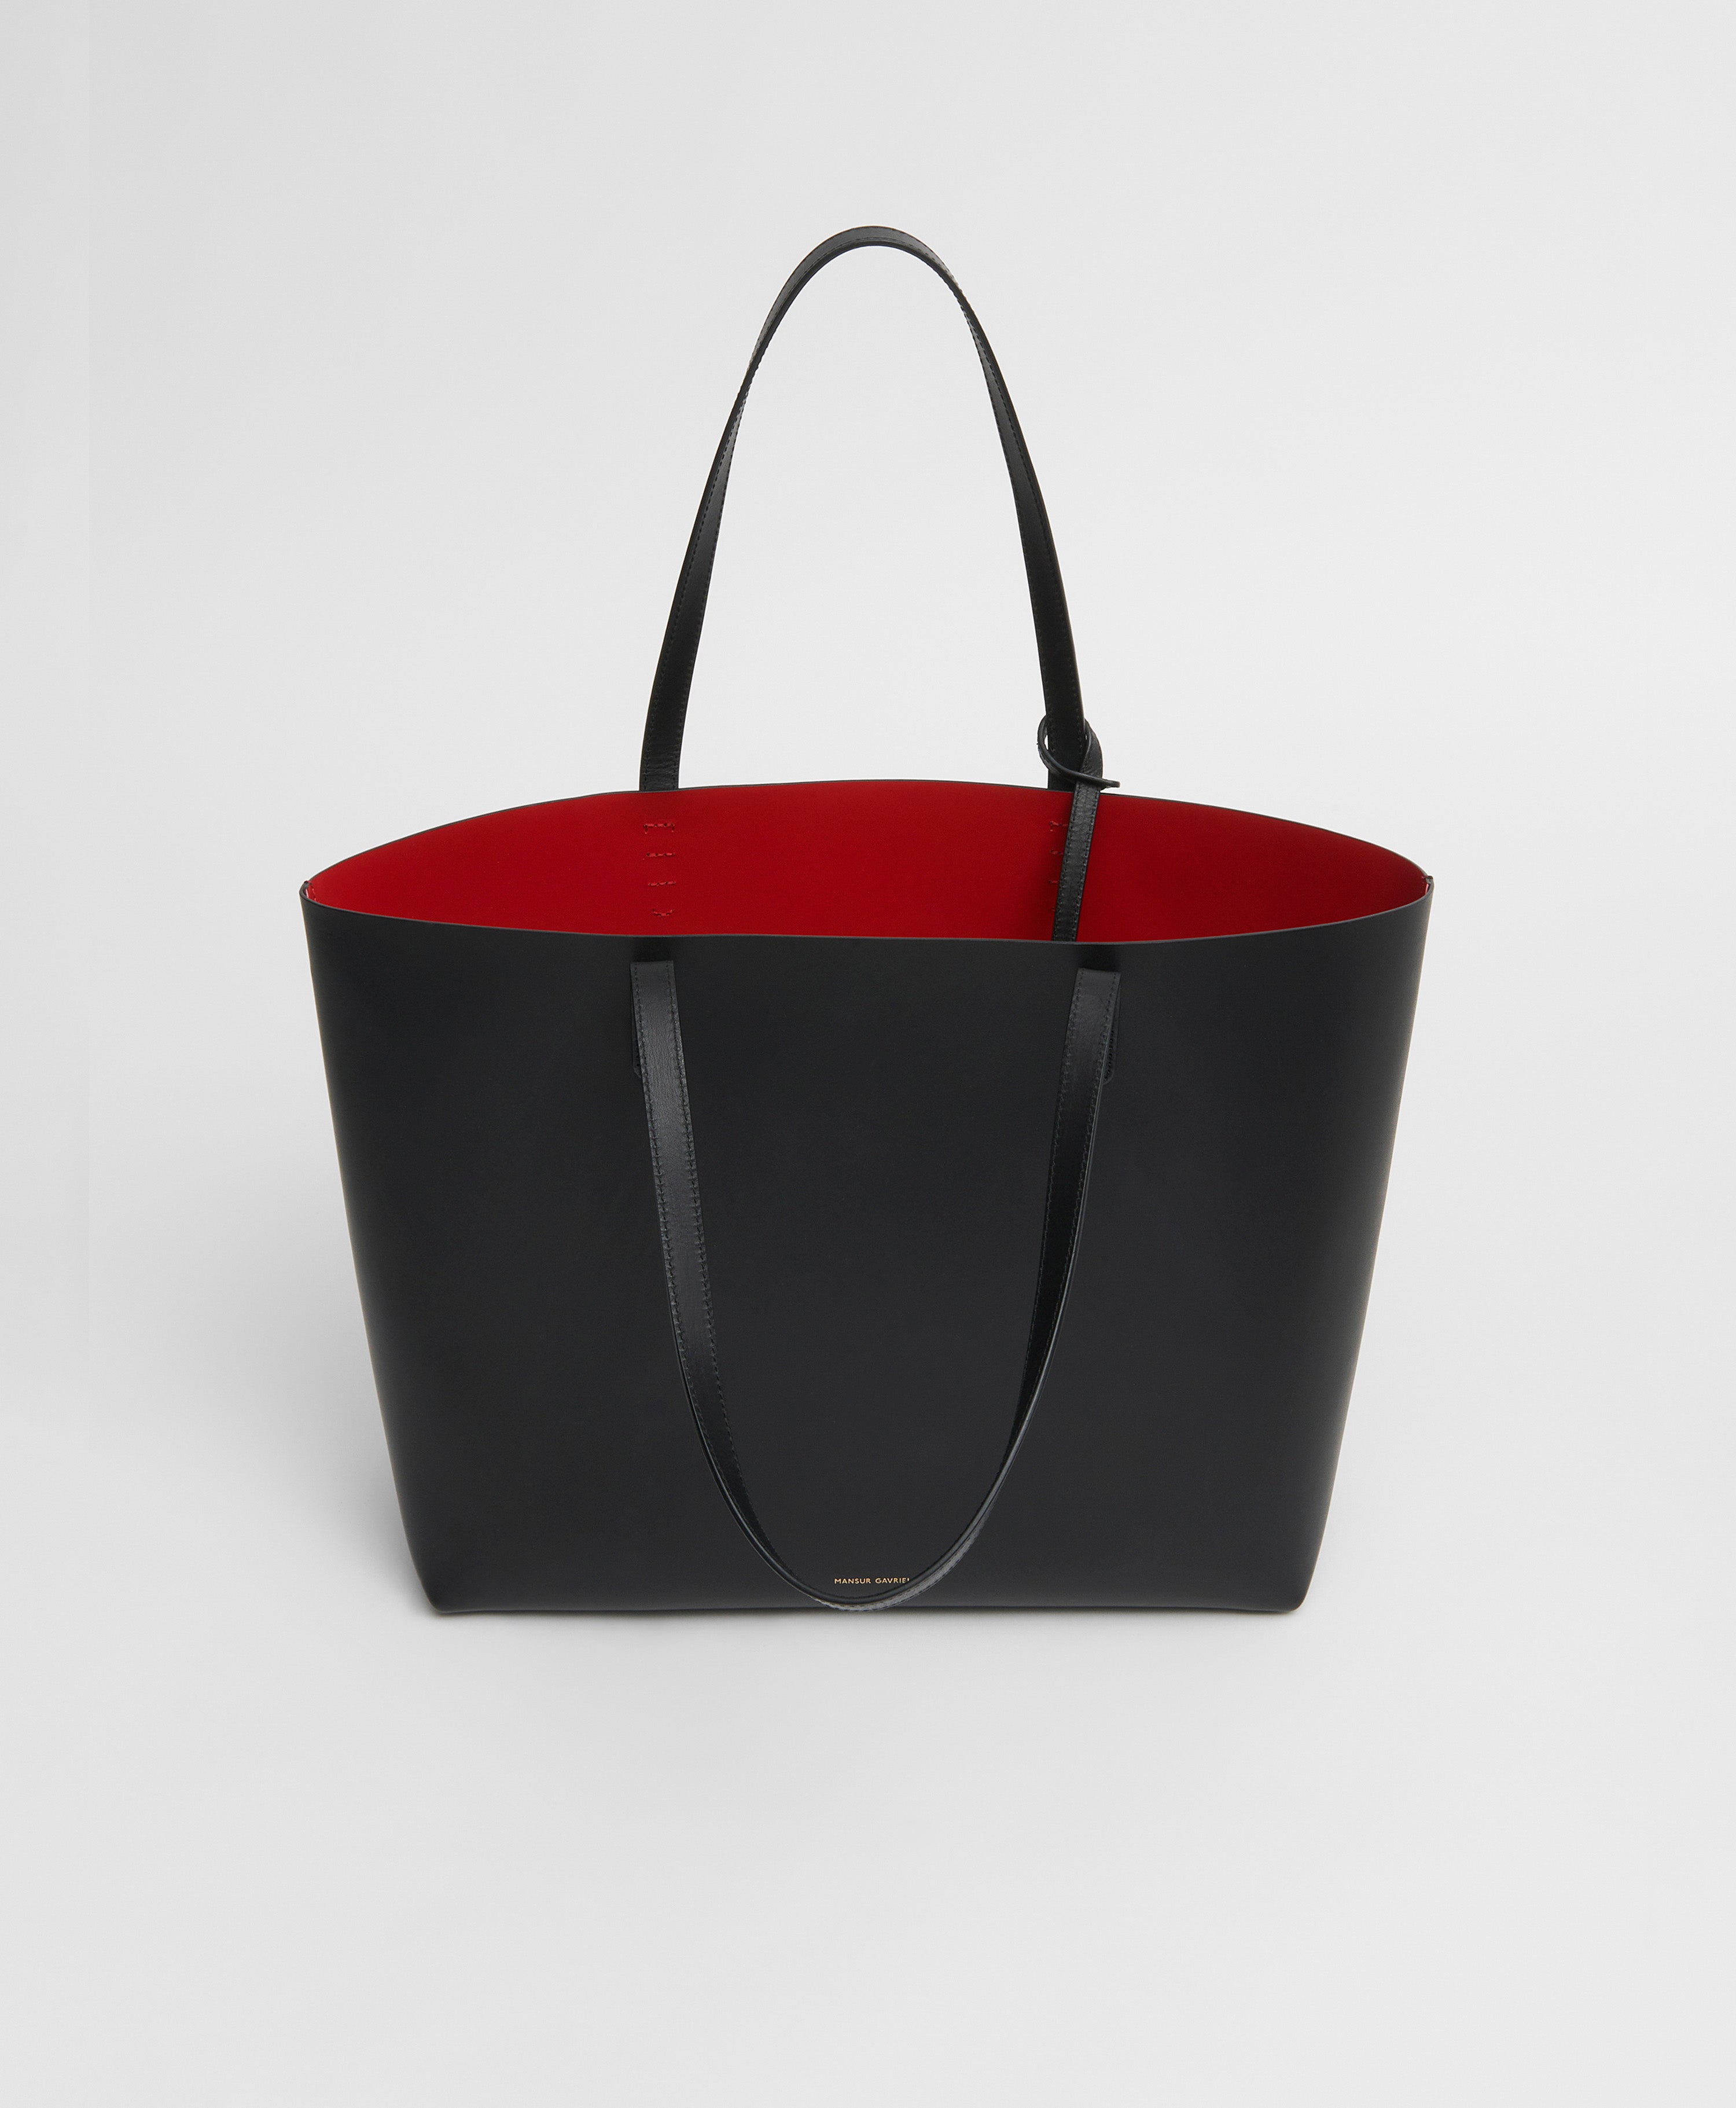 RED TOTE BAG - Sage Femme Italy